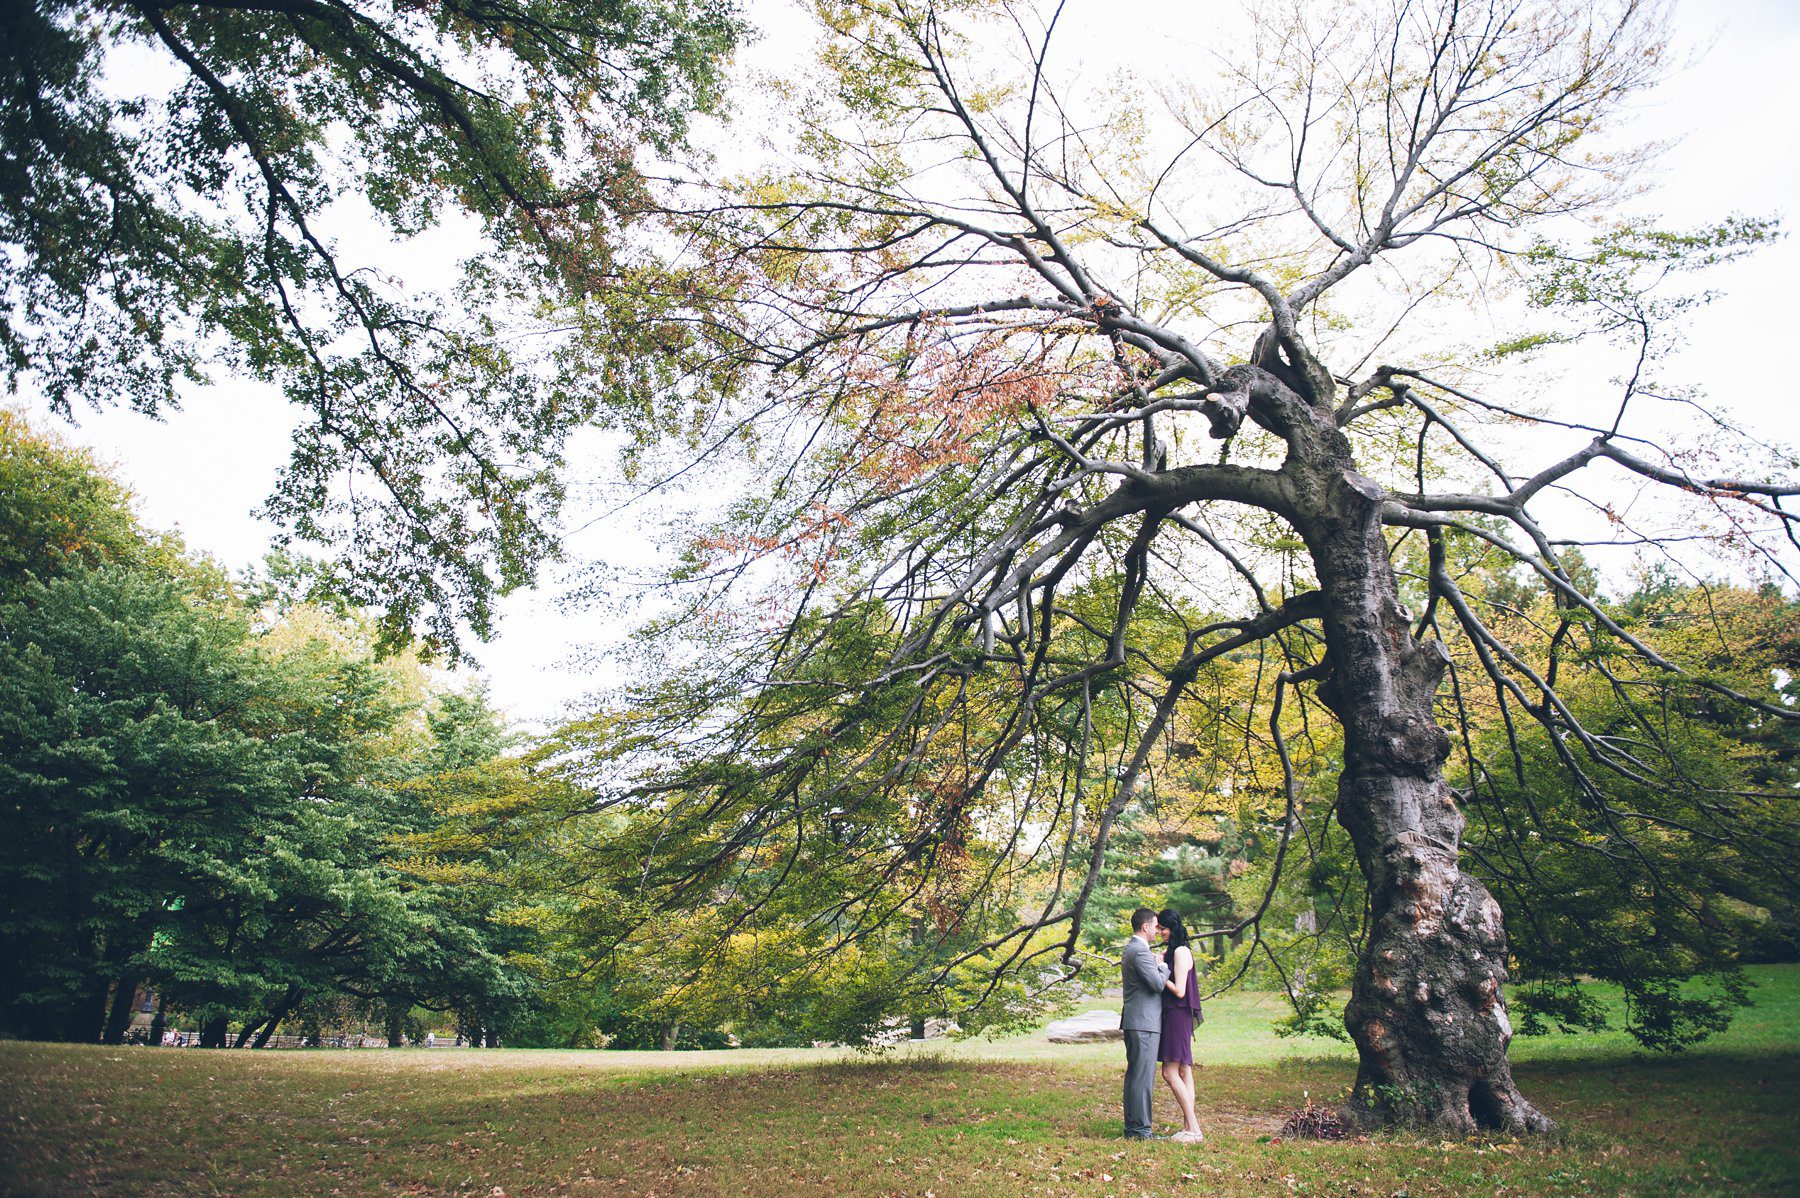 fall wedding in central park with foliage